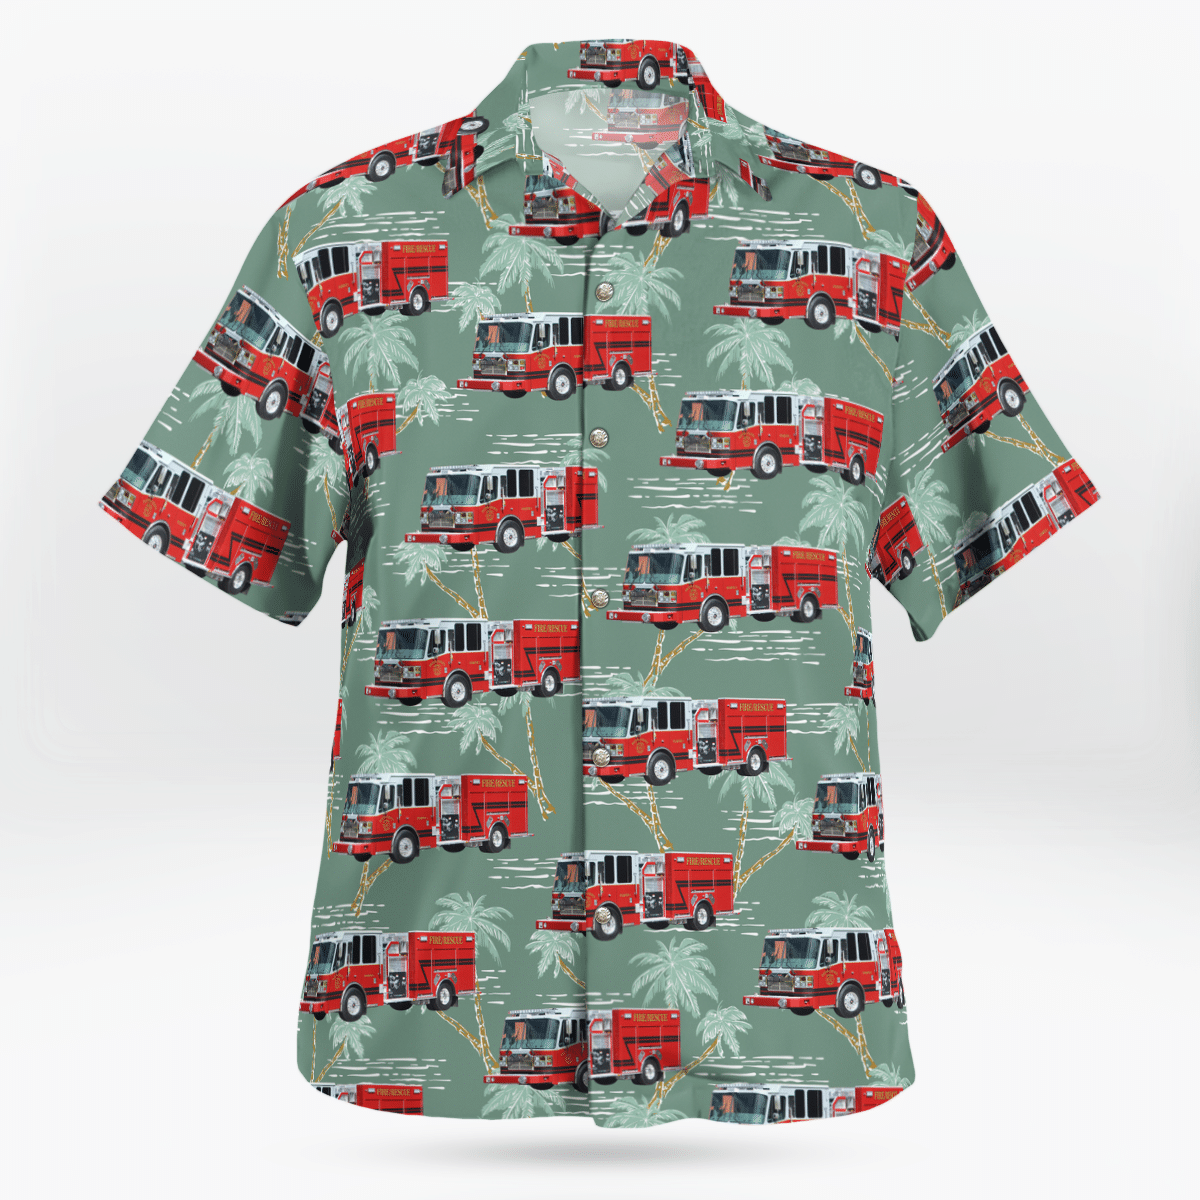 Hawaiian shirts never go out of style 186